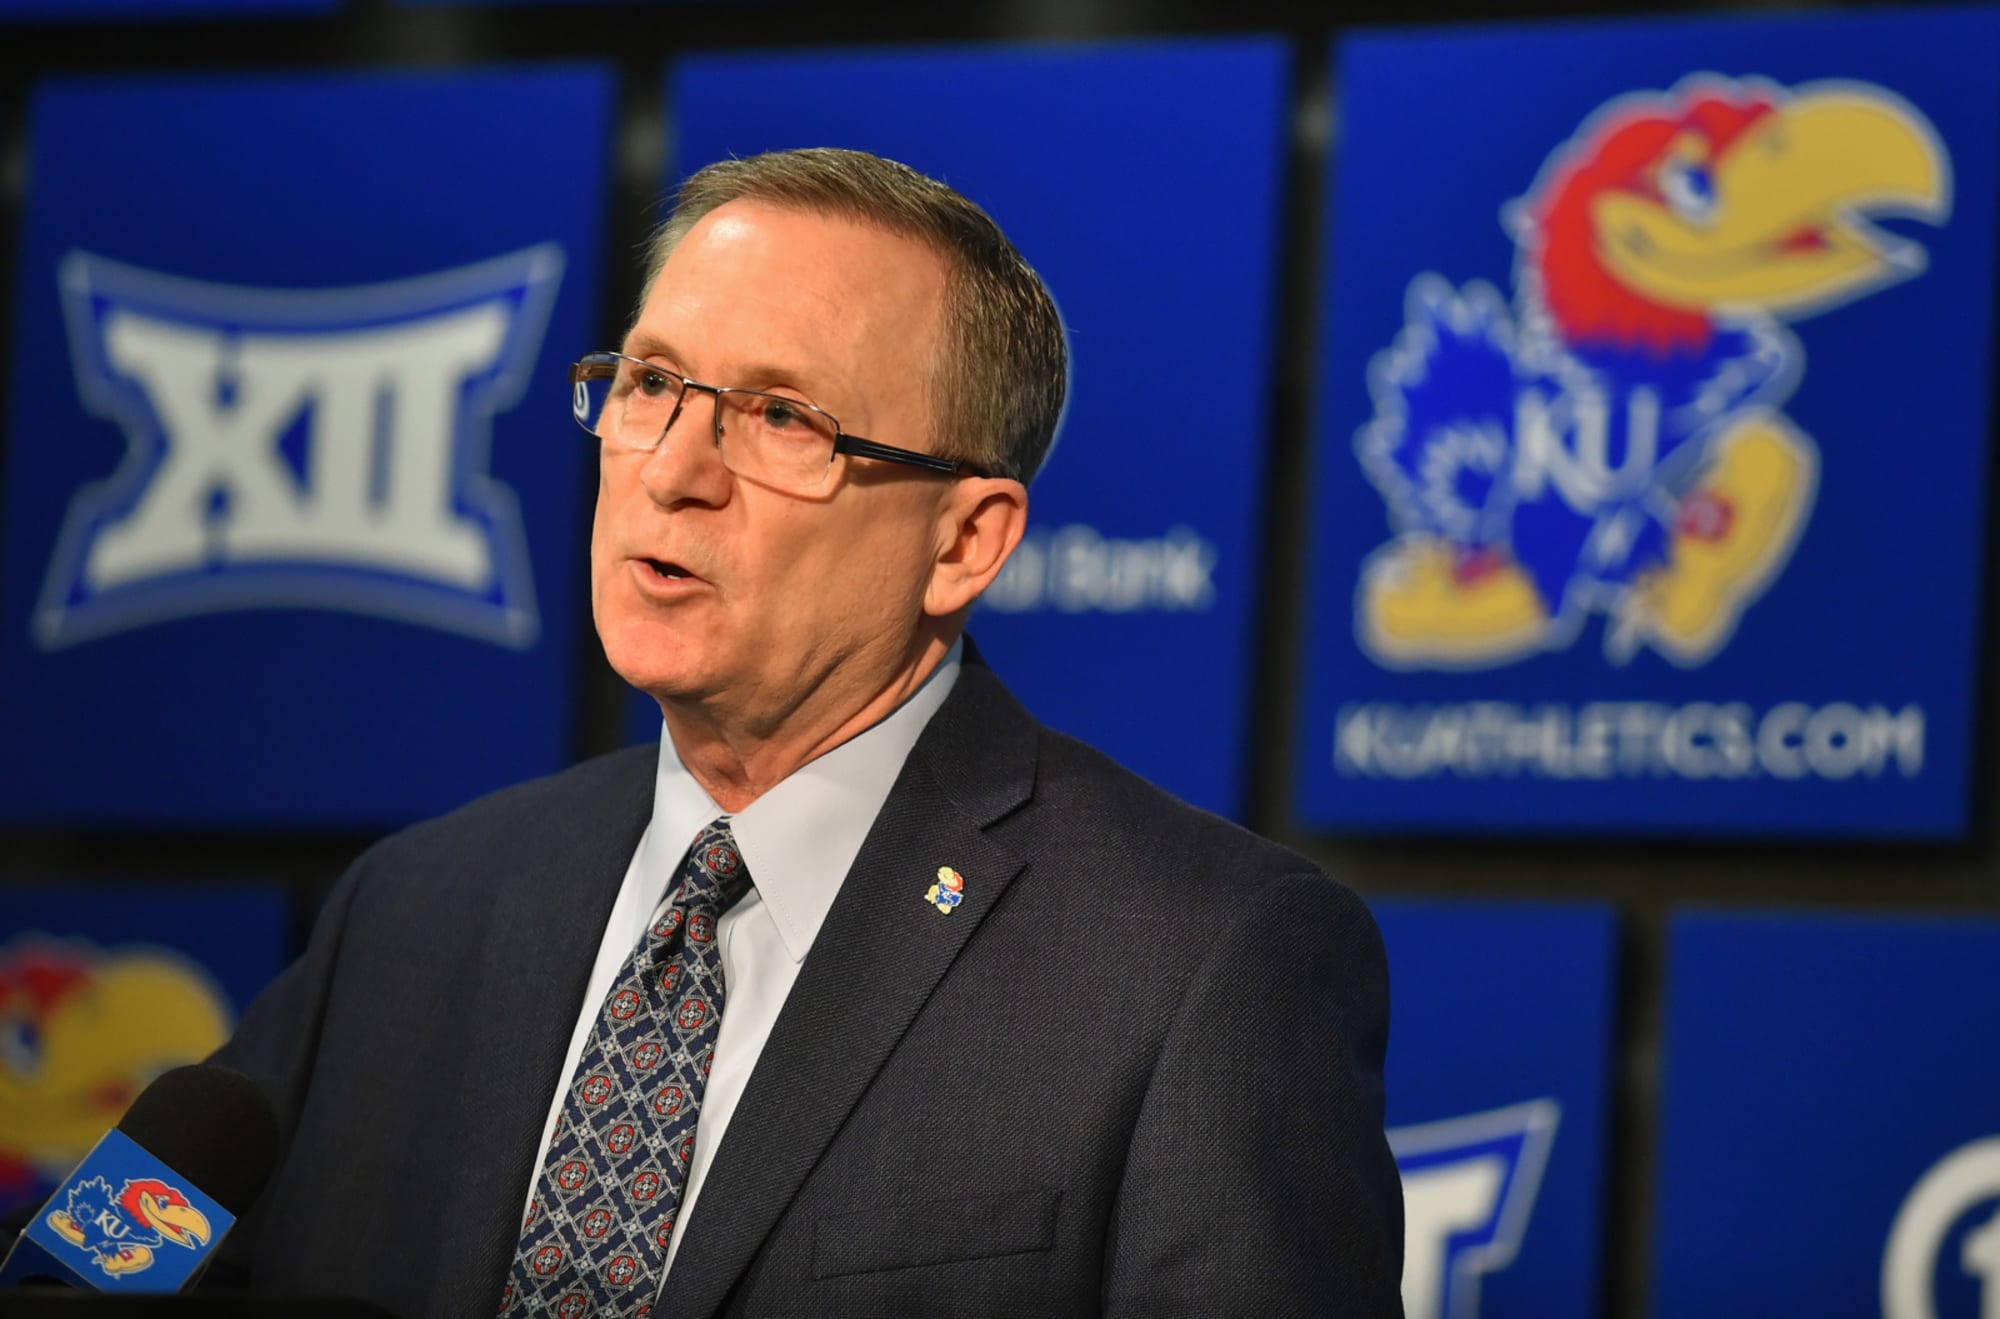 Kansas football: Time is a factor for KU as OC position remains open following Brent Dearmon’s departure - Through the Phog